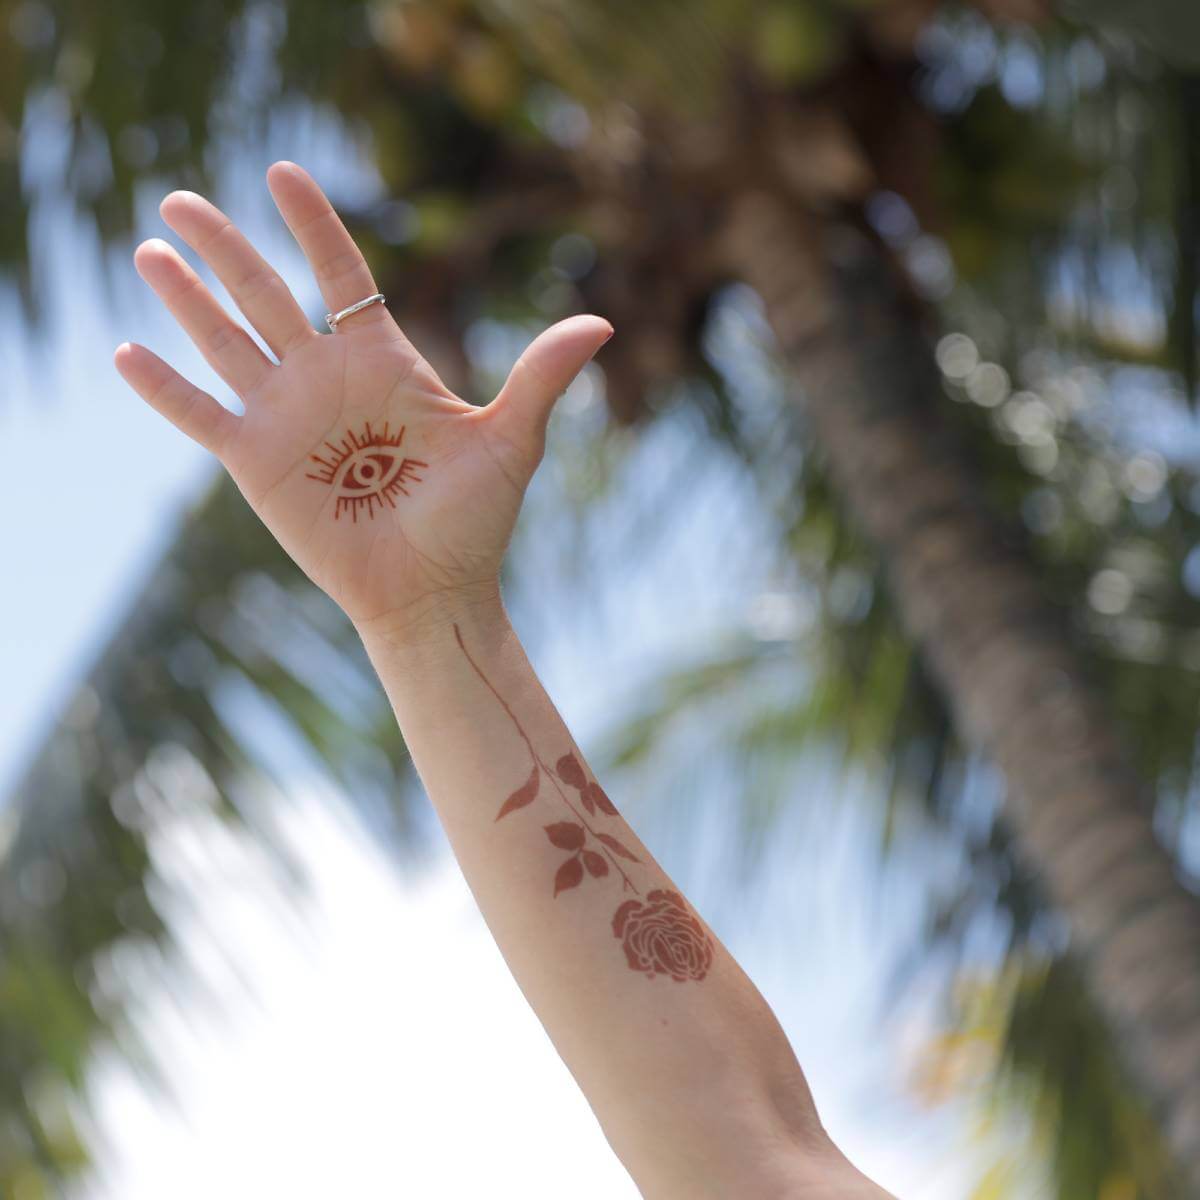 Certified Henna Tattoo and Body Art Course. - TWorld Training